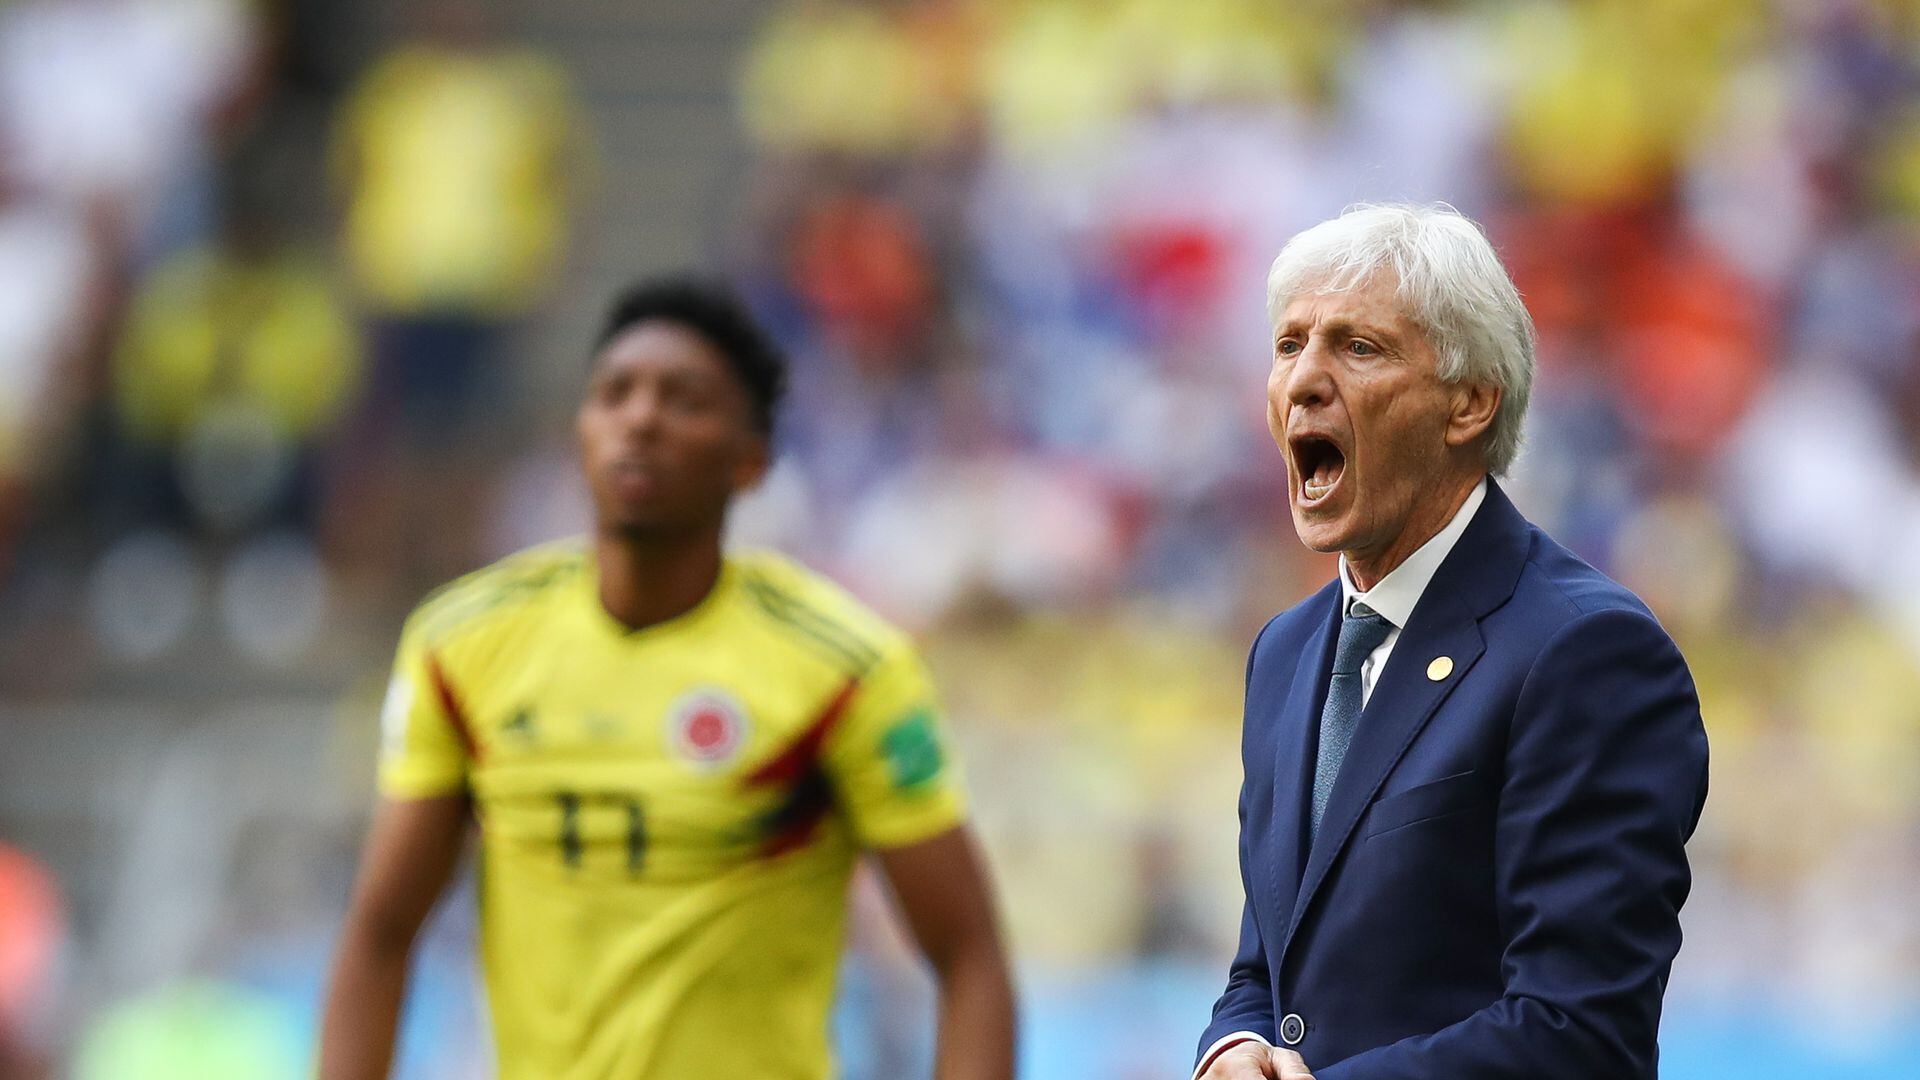 SARANSK, RUSSIA - JUNE 19: Jose Pekerman, Head coach of Colombia reacts during the 2018 FIFA World Cup Russia group H match between Colombia and Japan at Mordovia Arena on June 19, 2018 in Saransk, Russia. (Photo by Maja Hitij - FIFA/FIFA via Getty Images)